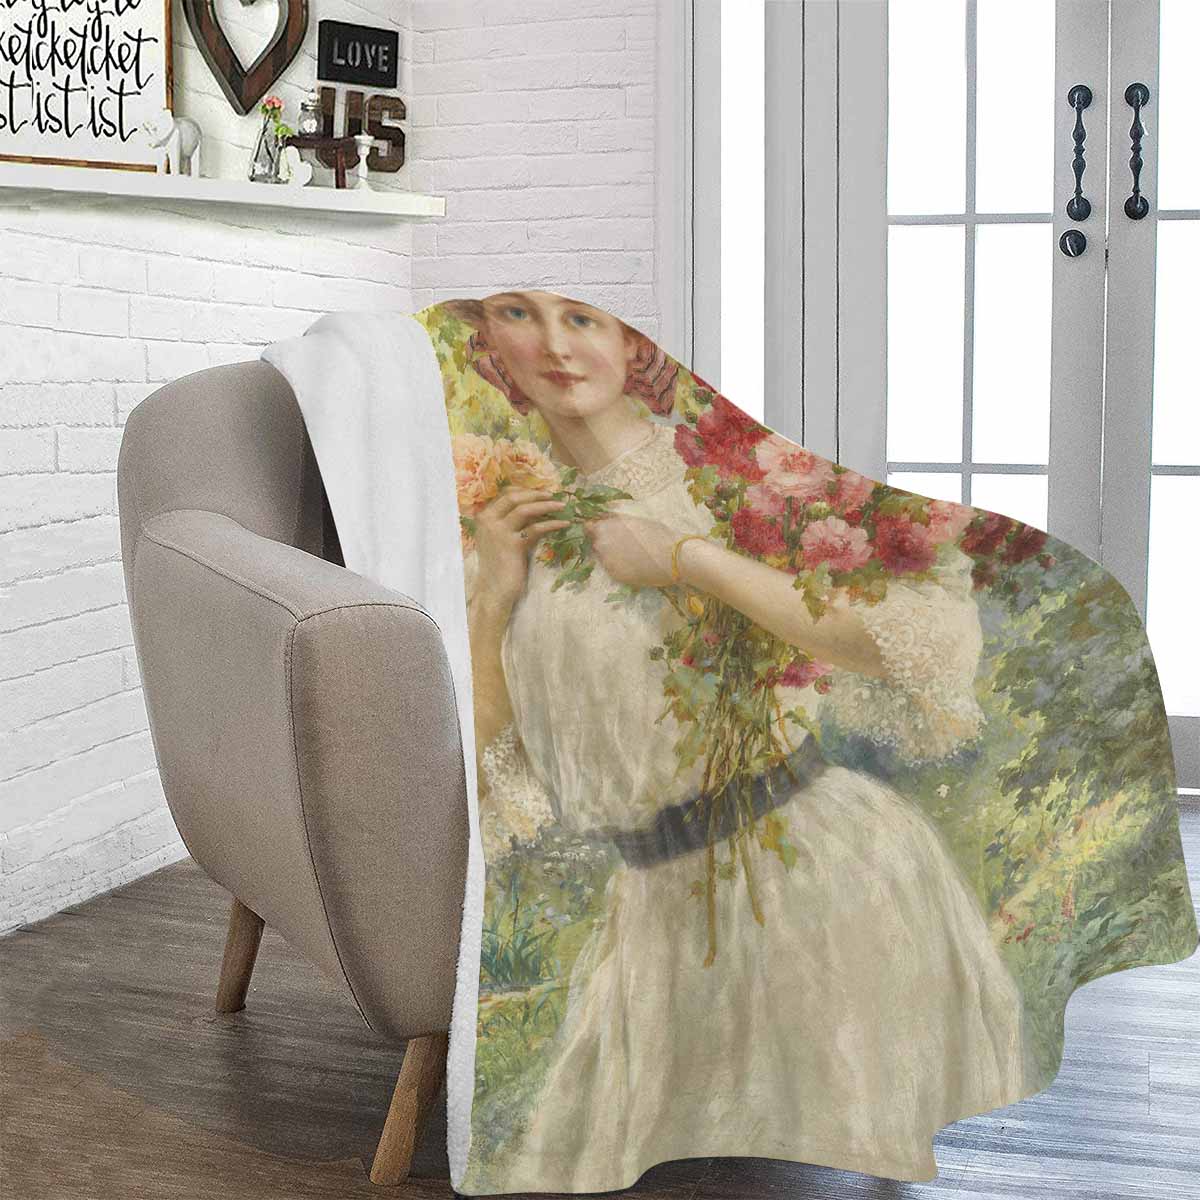 Victorian Lady Design BLANKET, LARGE 60 in x 80 in, SUMMER